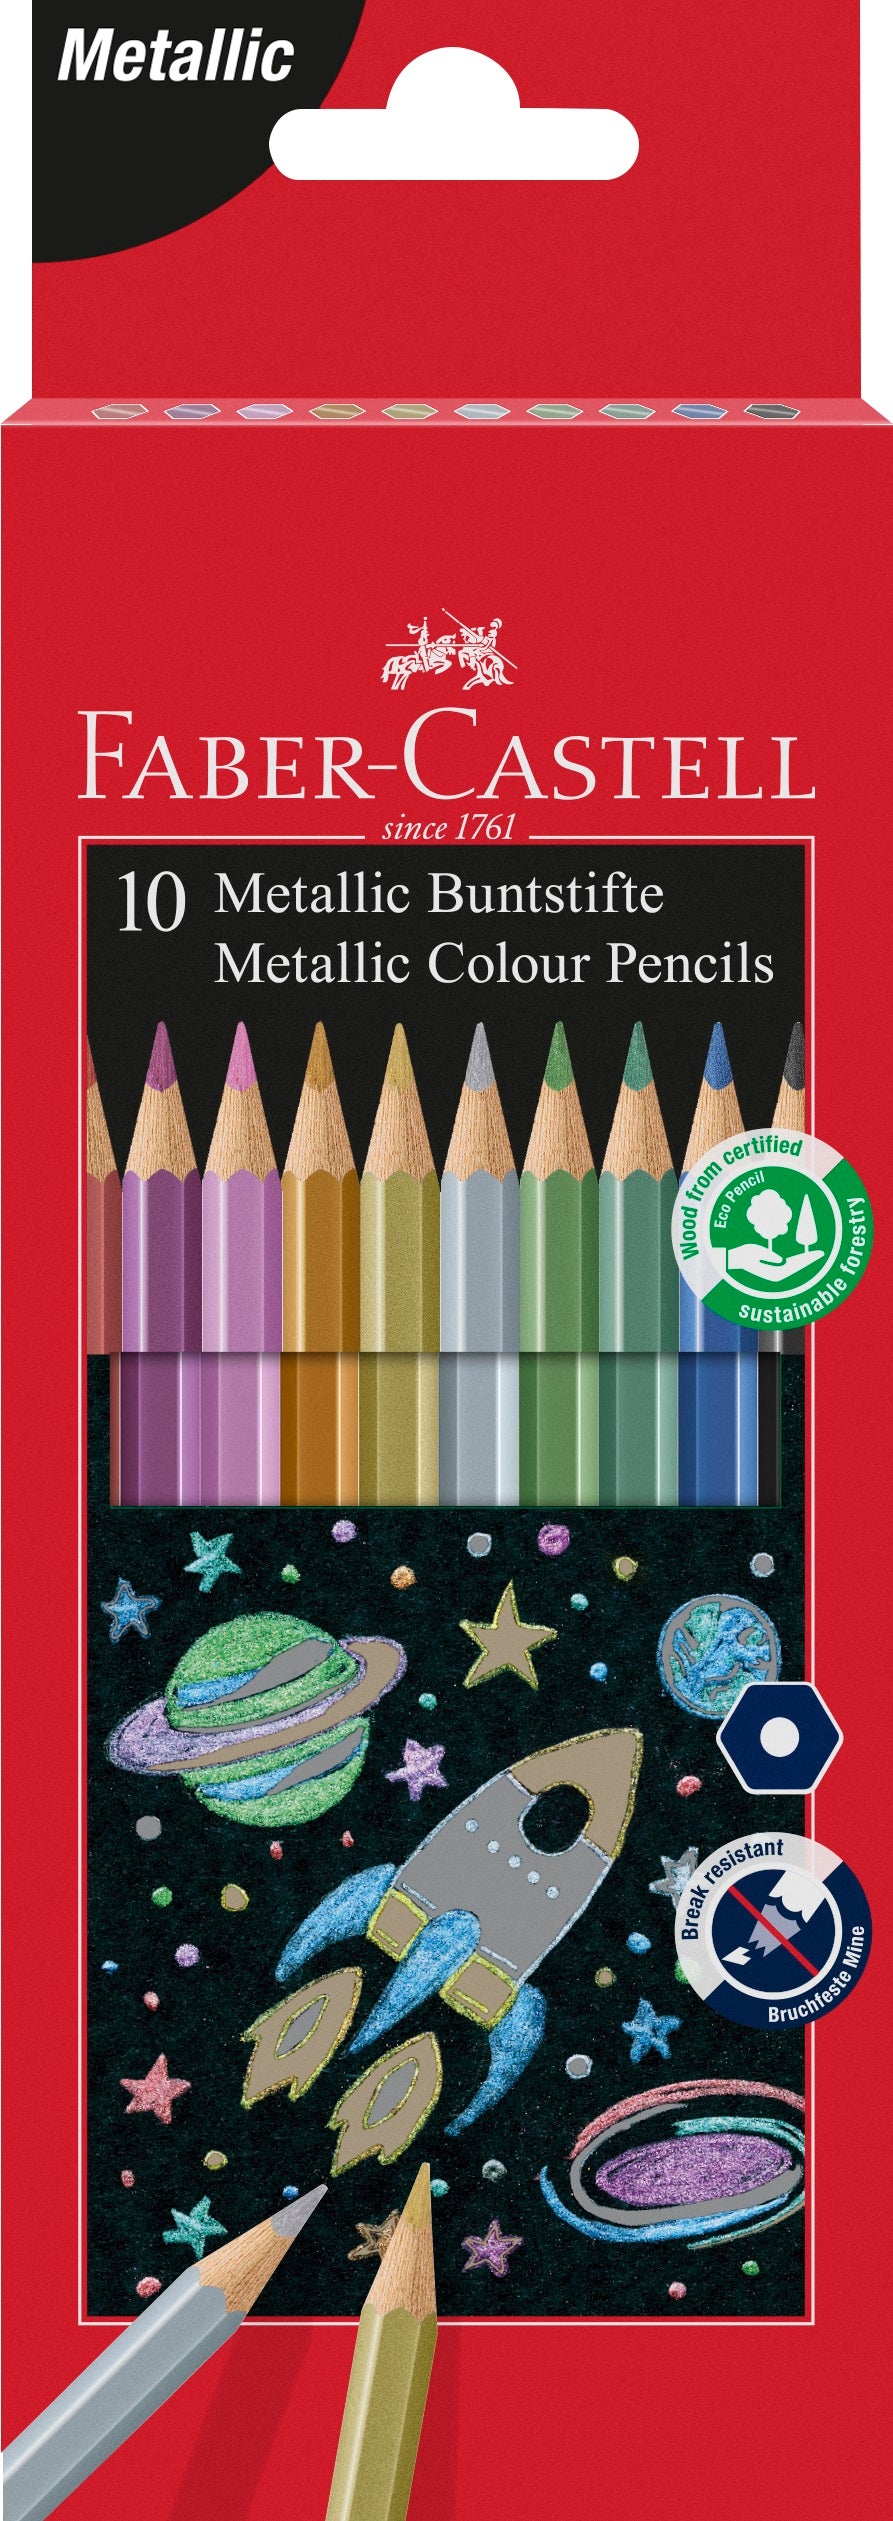 Retail packaging for a pack of 10 metallic colour pencils by Faber Castell. The packaging has a red border, a cut out in the centre showing the pencils inside plus an illustration of them in use.